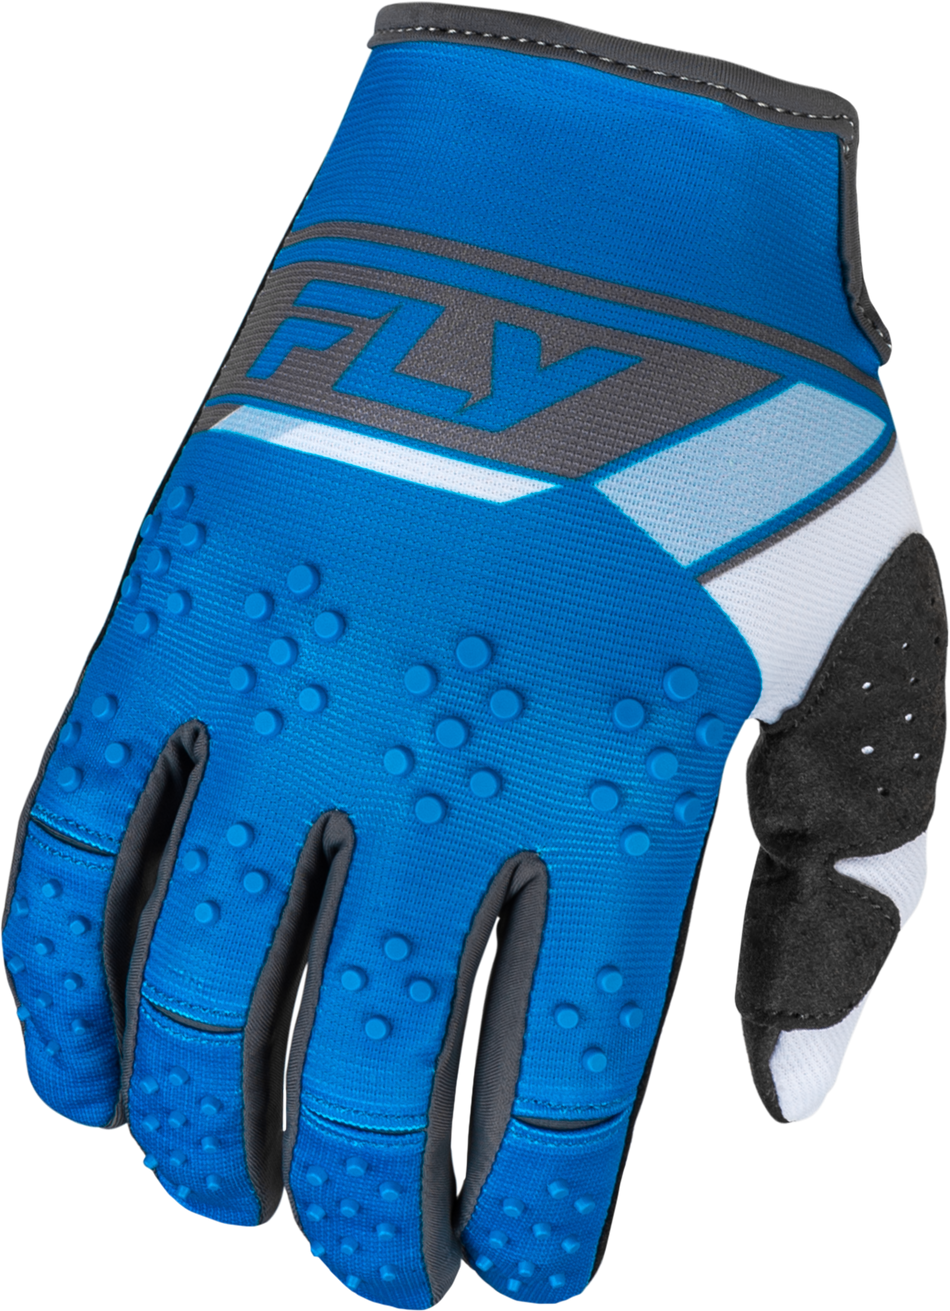 FLY RACING Youth Kinetic Prix Gloves Bright Blue/Charcoal Ym 377-410YM